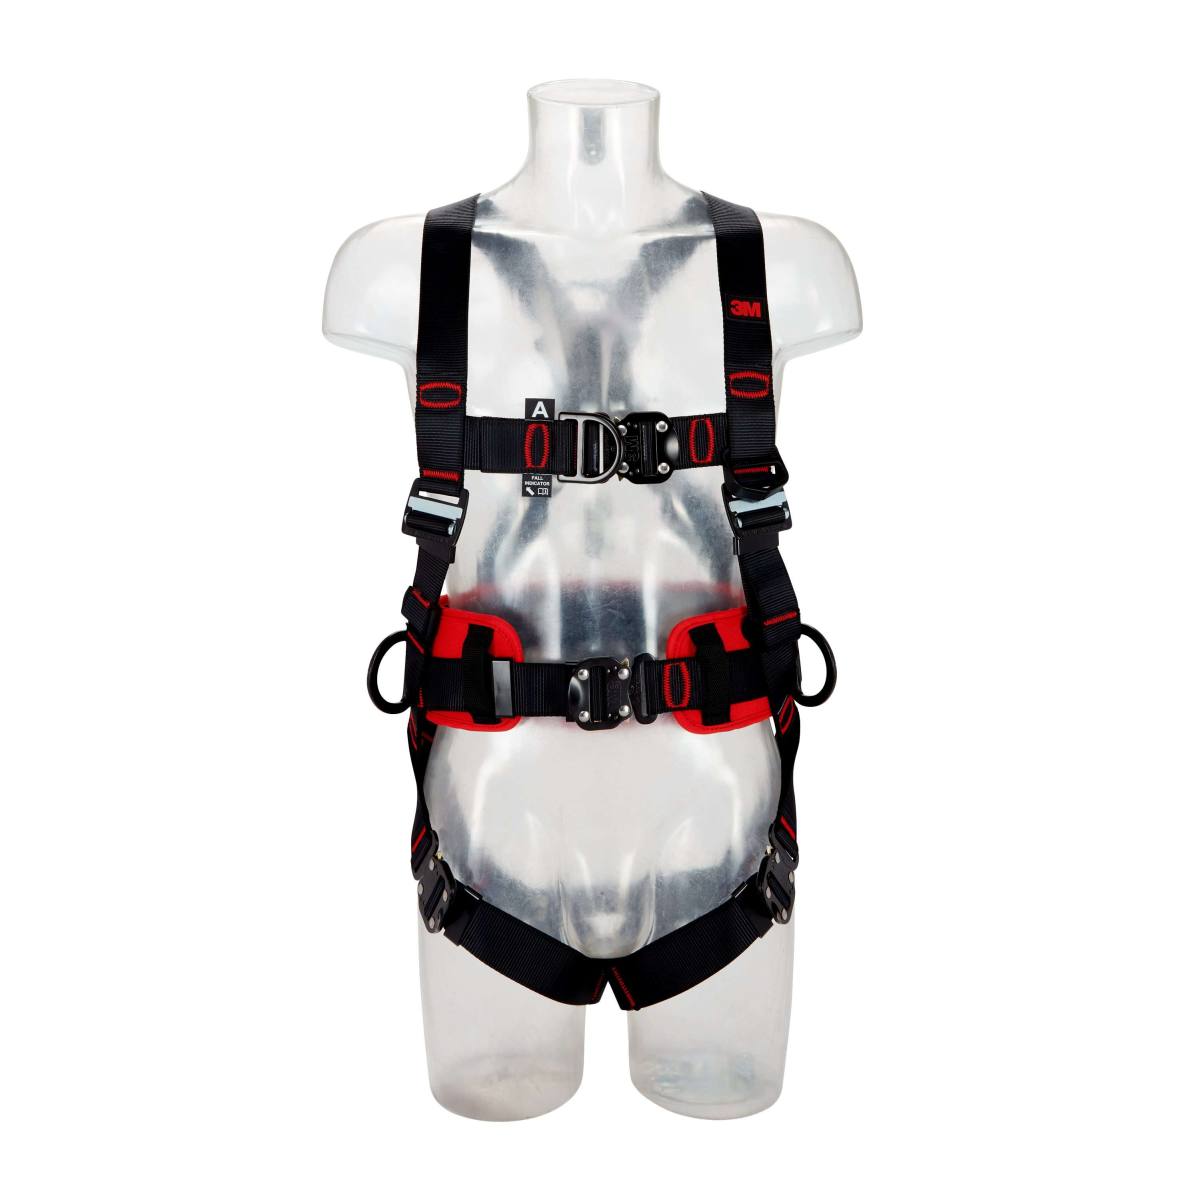  3M PROTECTA Full body harness - chest and rear fall arrest eyelets, comfort harness with side eyelets, automatic buckles, chest and rear fall indicators, belt end depot, label protection with labelling field, black coated, XL